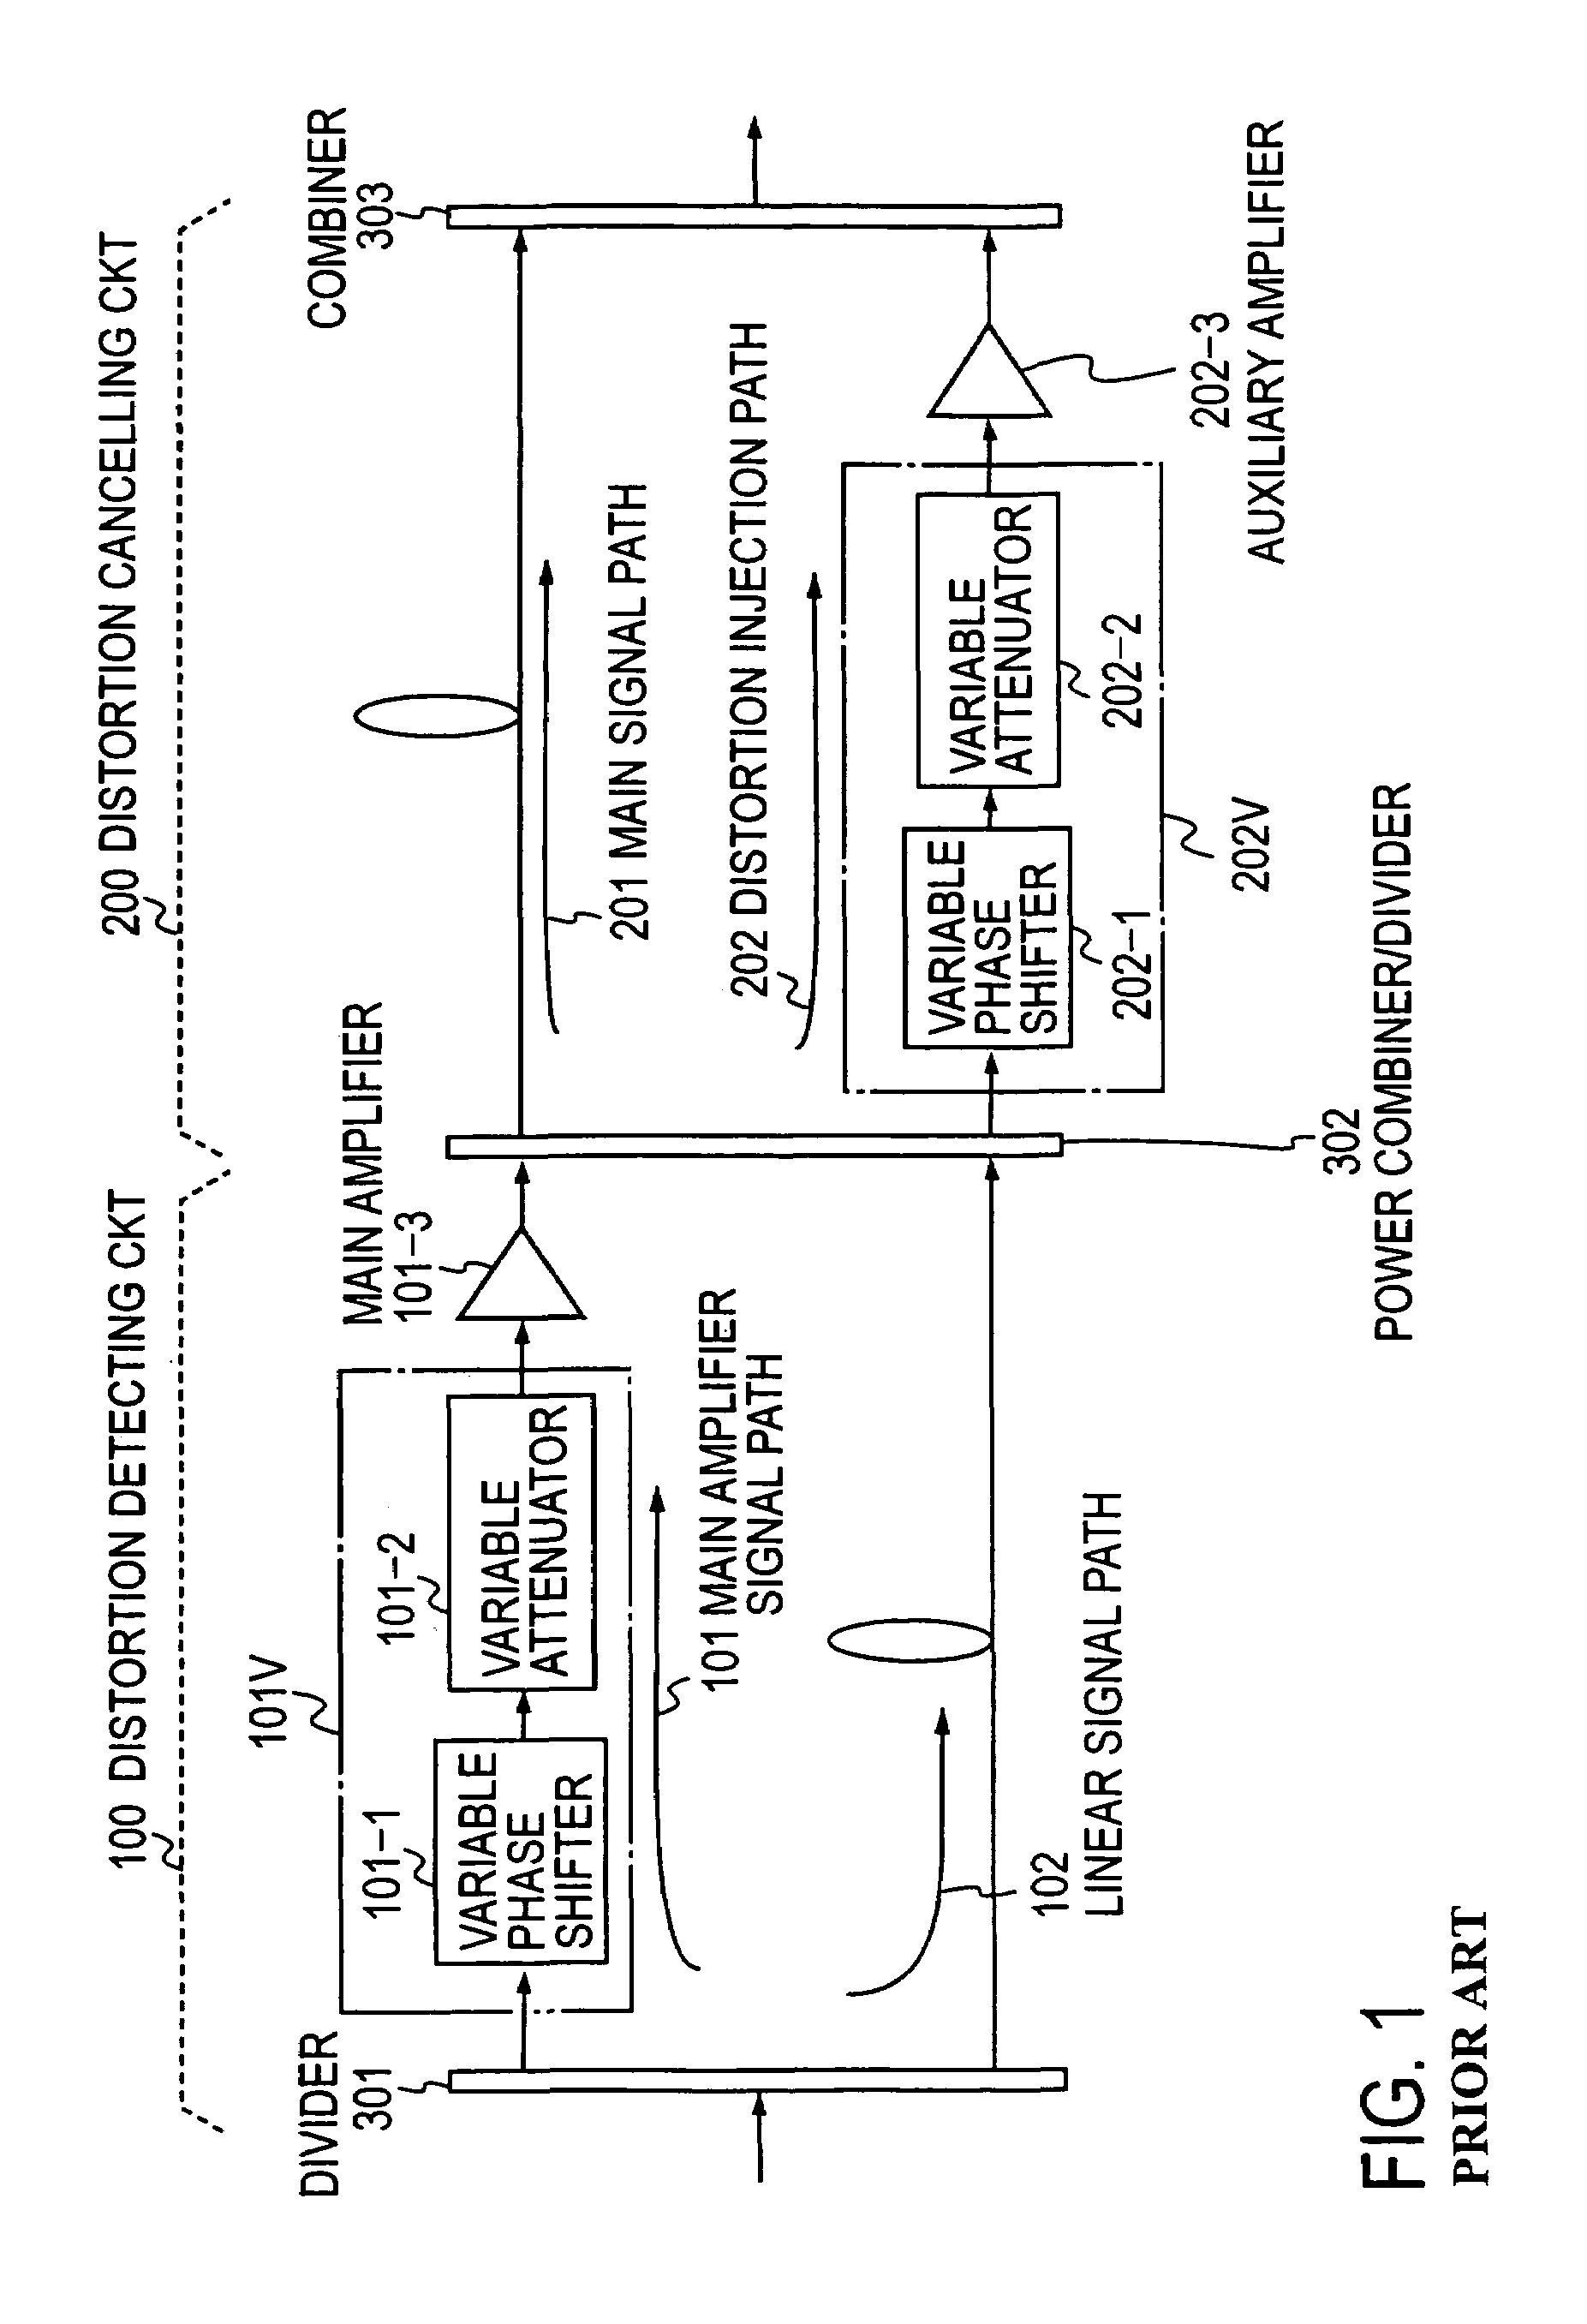 Multi-band feed-forward amplifier and adjustment method therefor